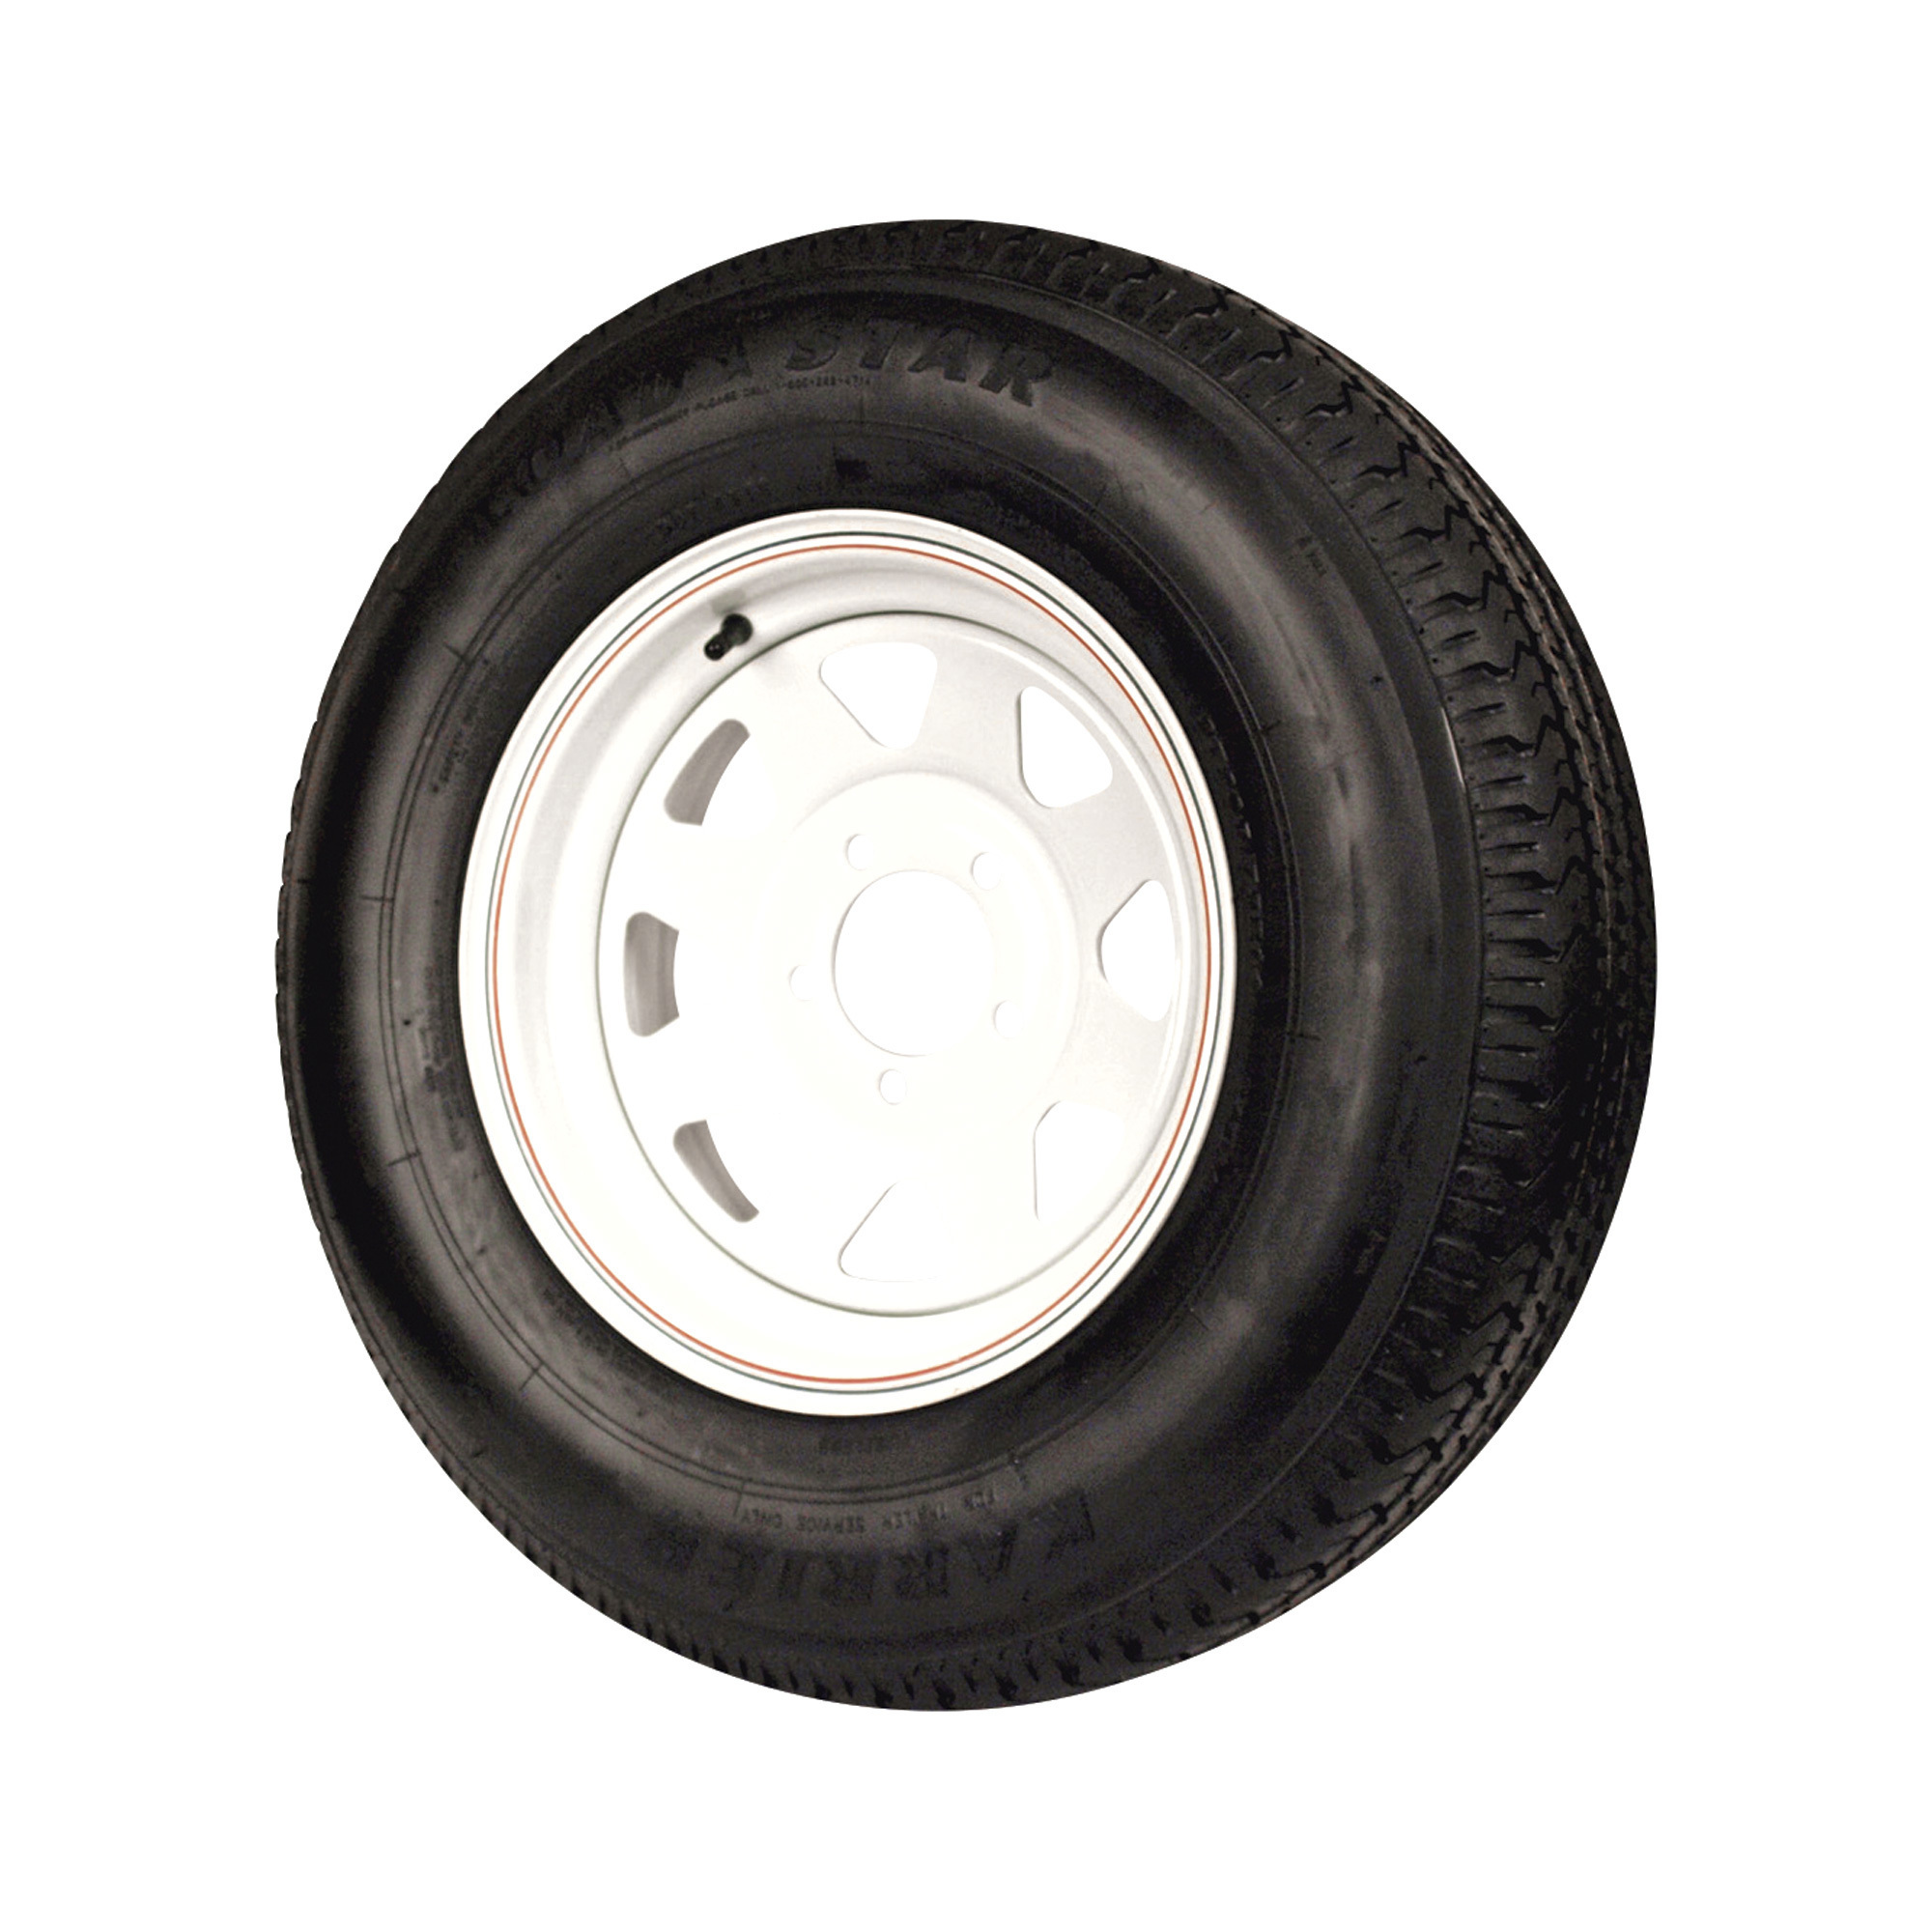 Kenda Karrier 14Inch 8-Ply Radial Trailer Tire and Wheel Assembly â ST205/75R-14, 5-Hole, Load Range D, Model DM205R4D-5CI